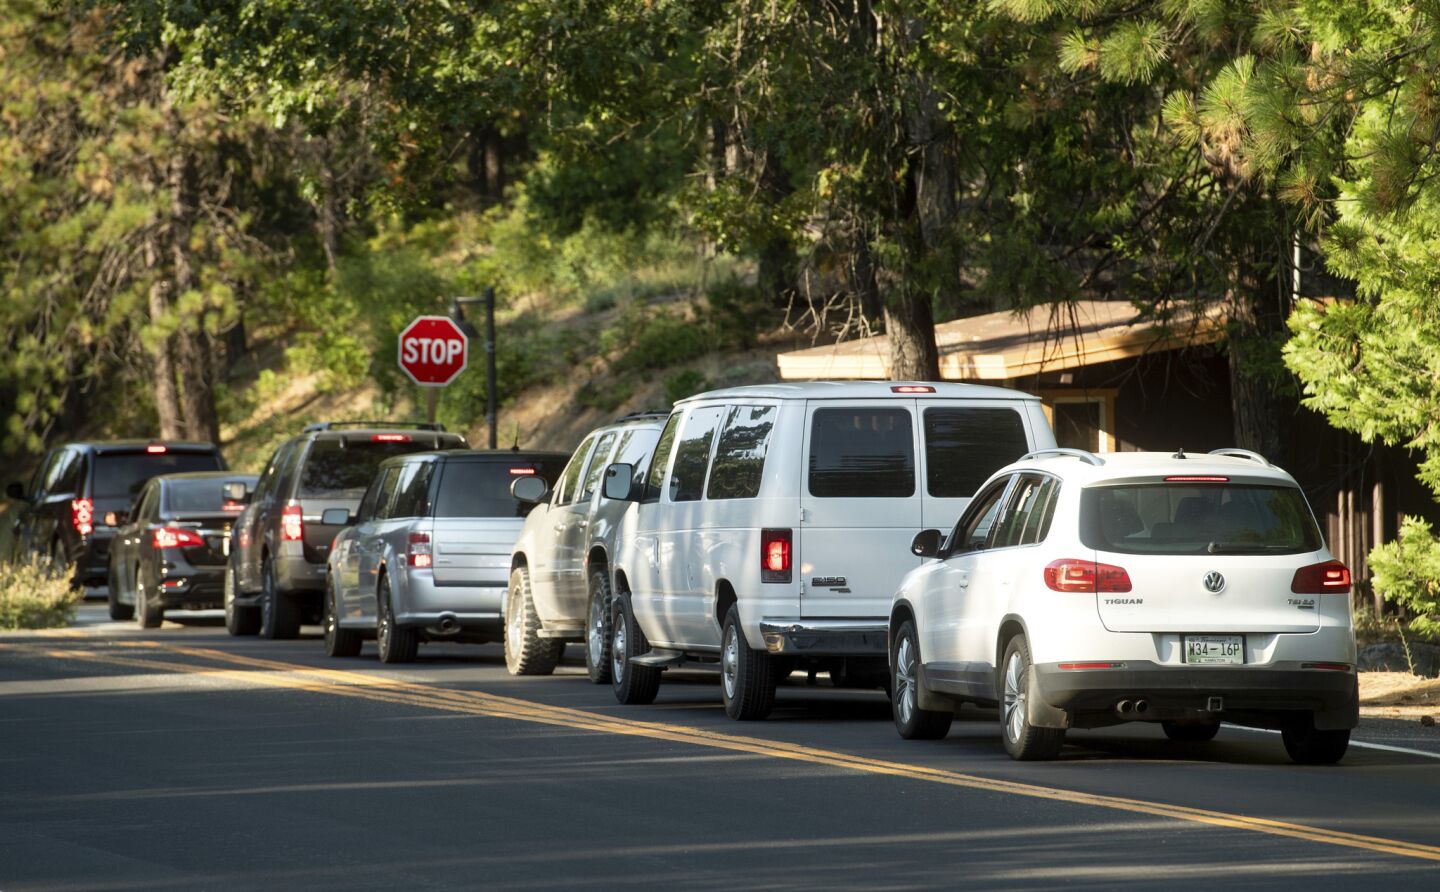 Vehicles leave Yosemite National Park as the Ferguson fire burns nearby.